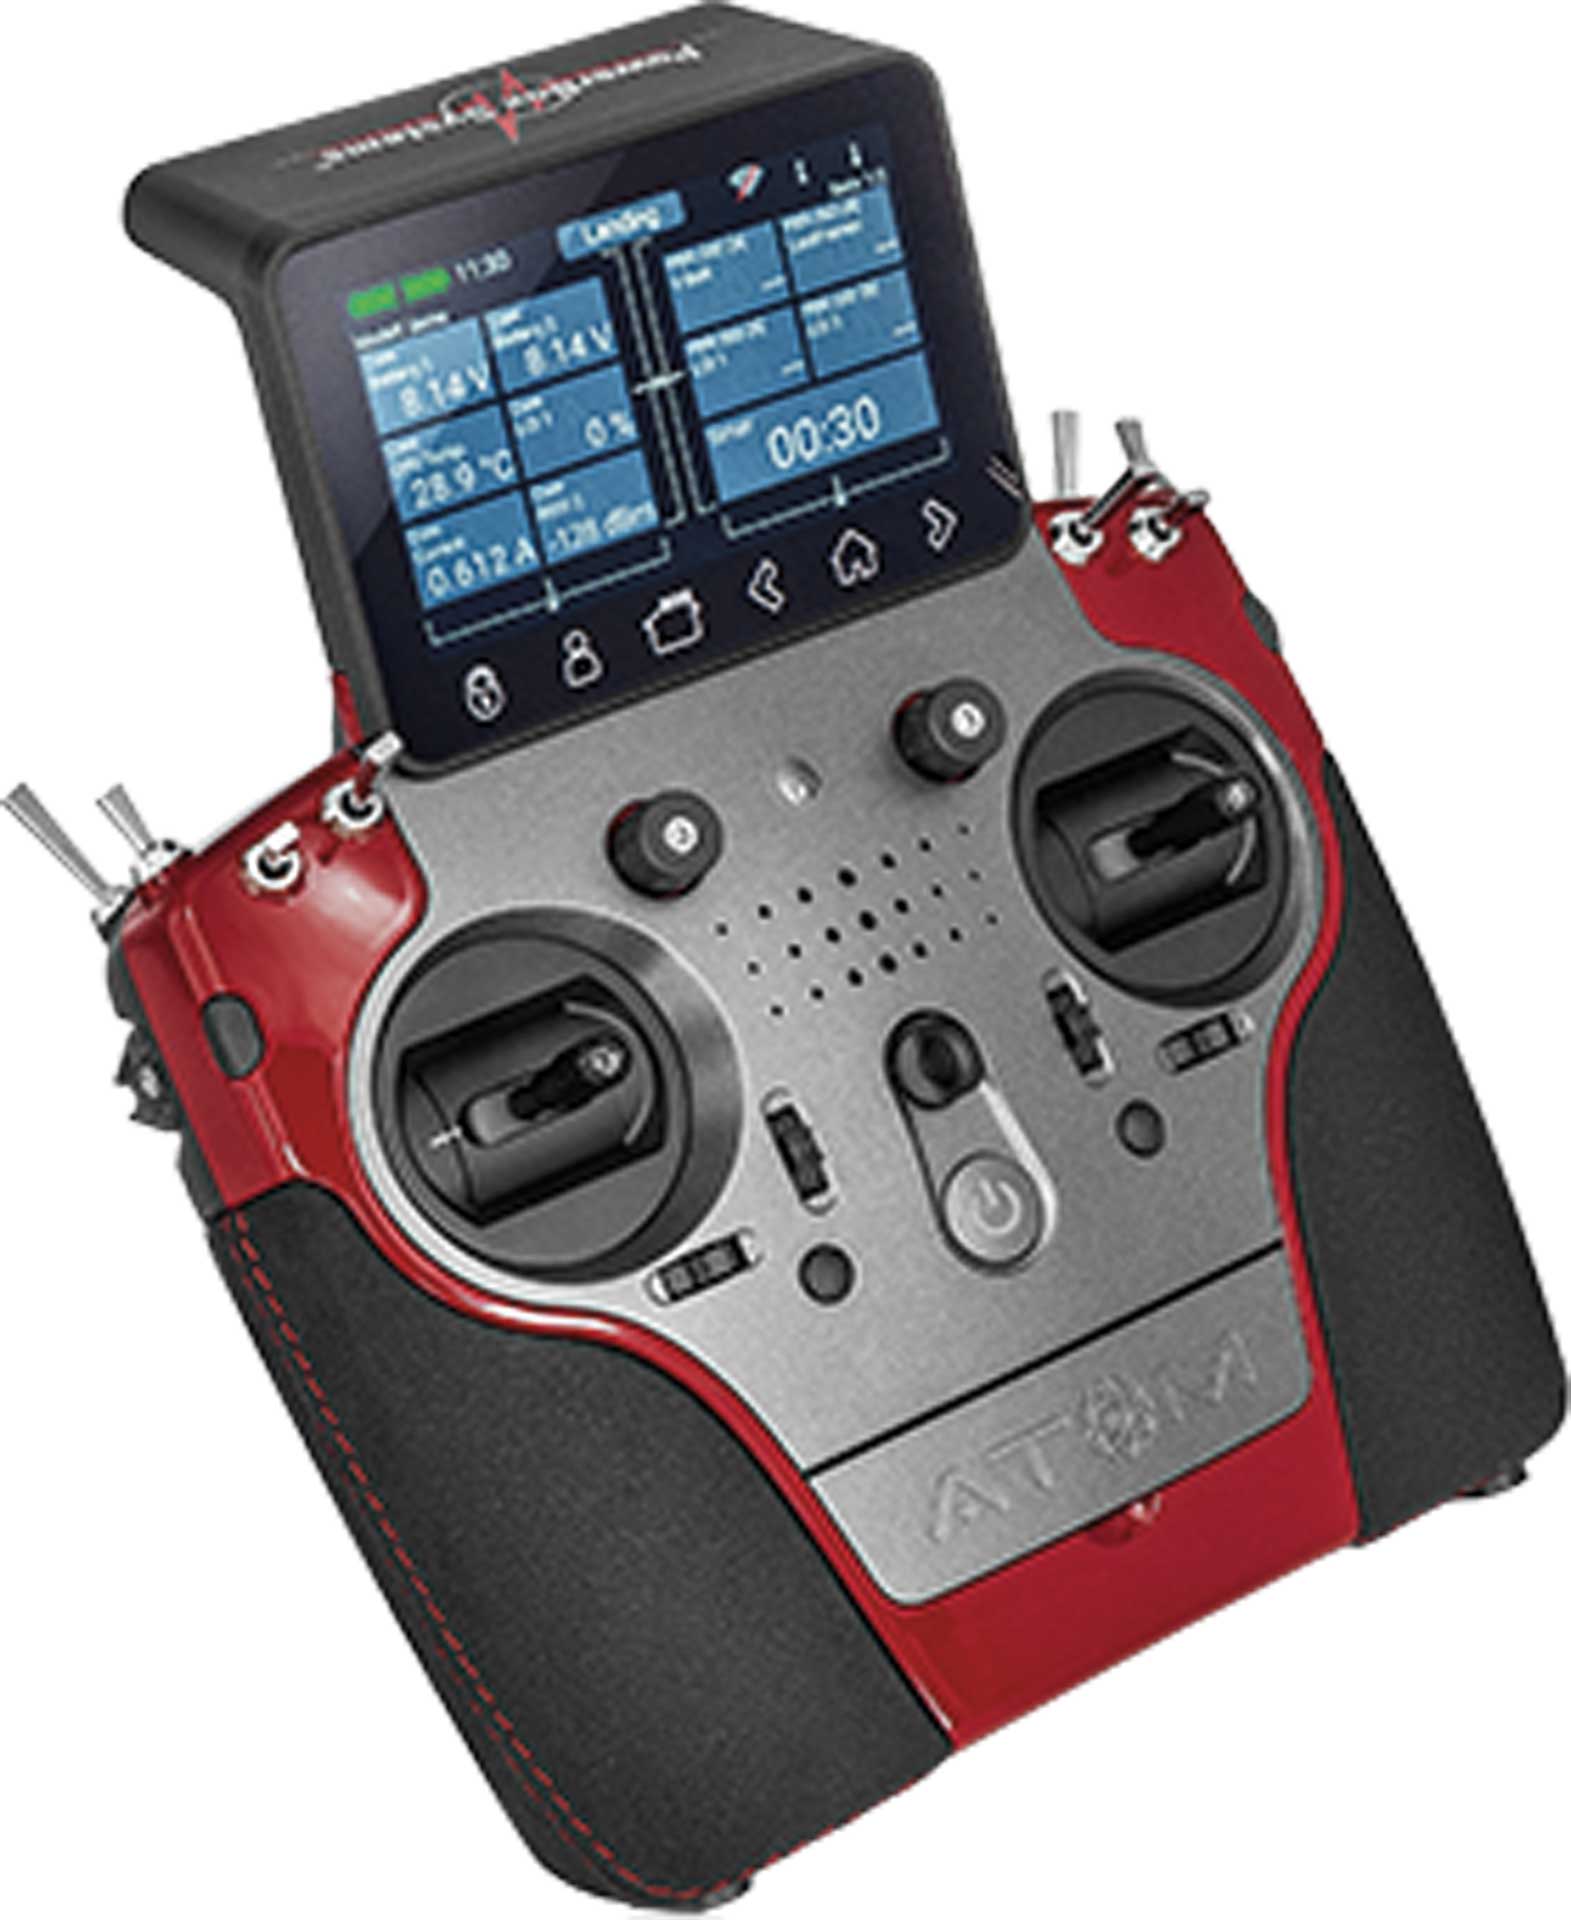 POWERBOX SYSTEMS ATOM 2,4Ghz 18-channel transmitter Handheld Mode 2